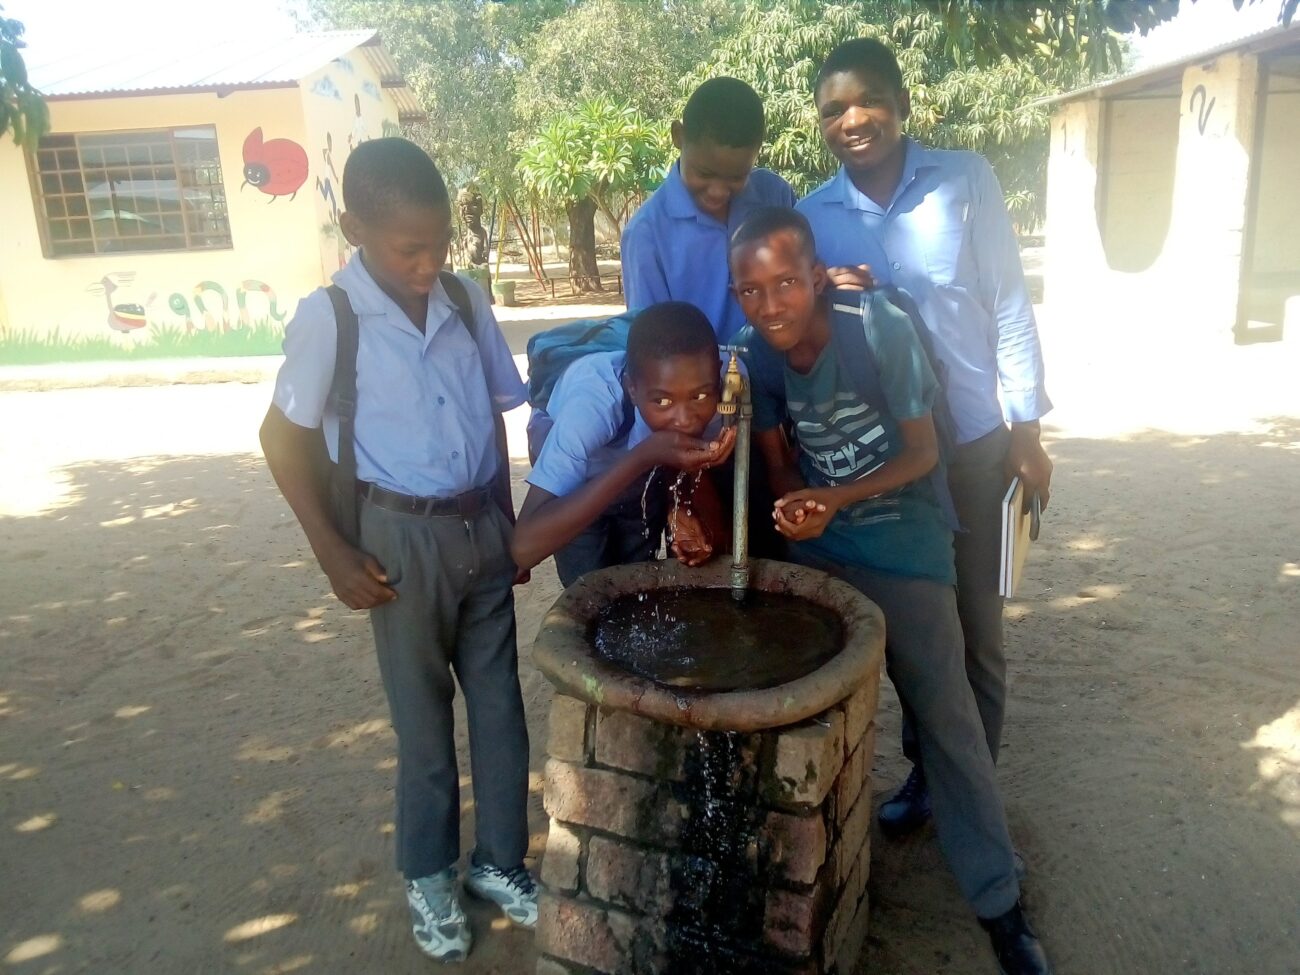 NAMIBIA: Students have clean water thanks to donor funding from Salesian Missions